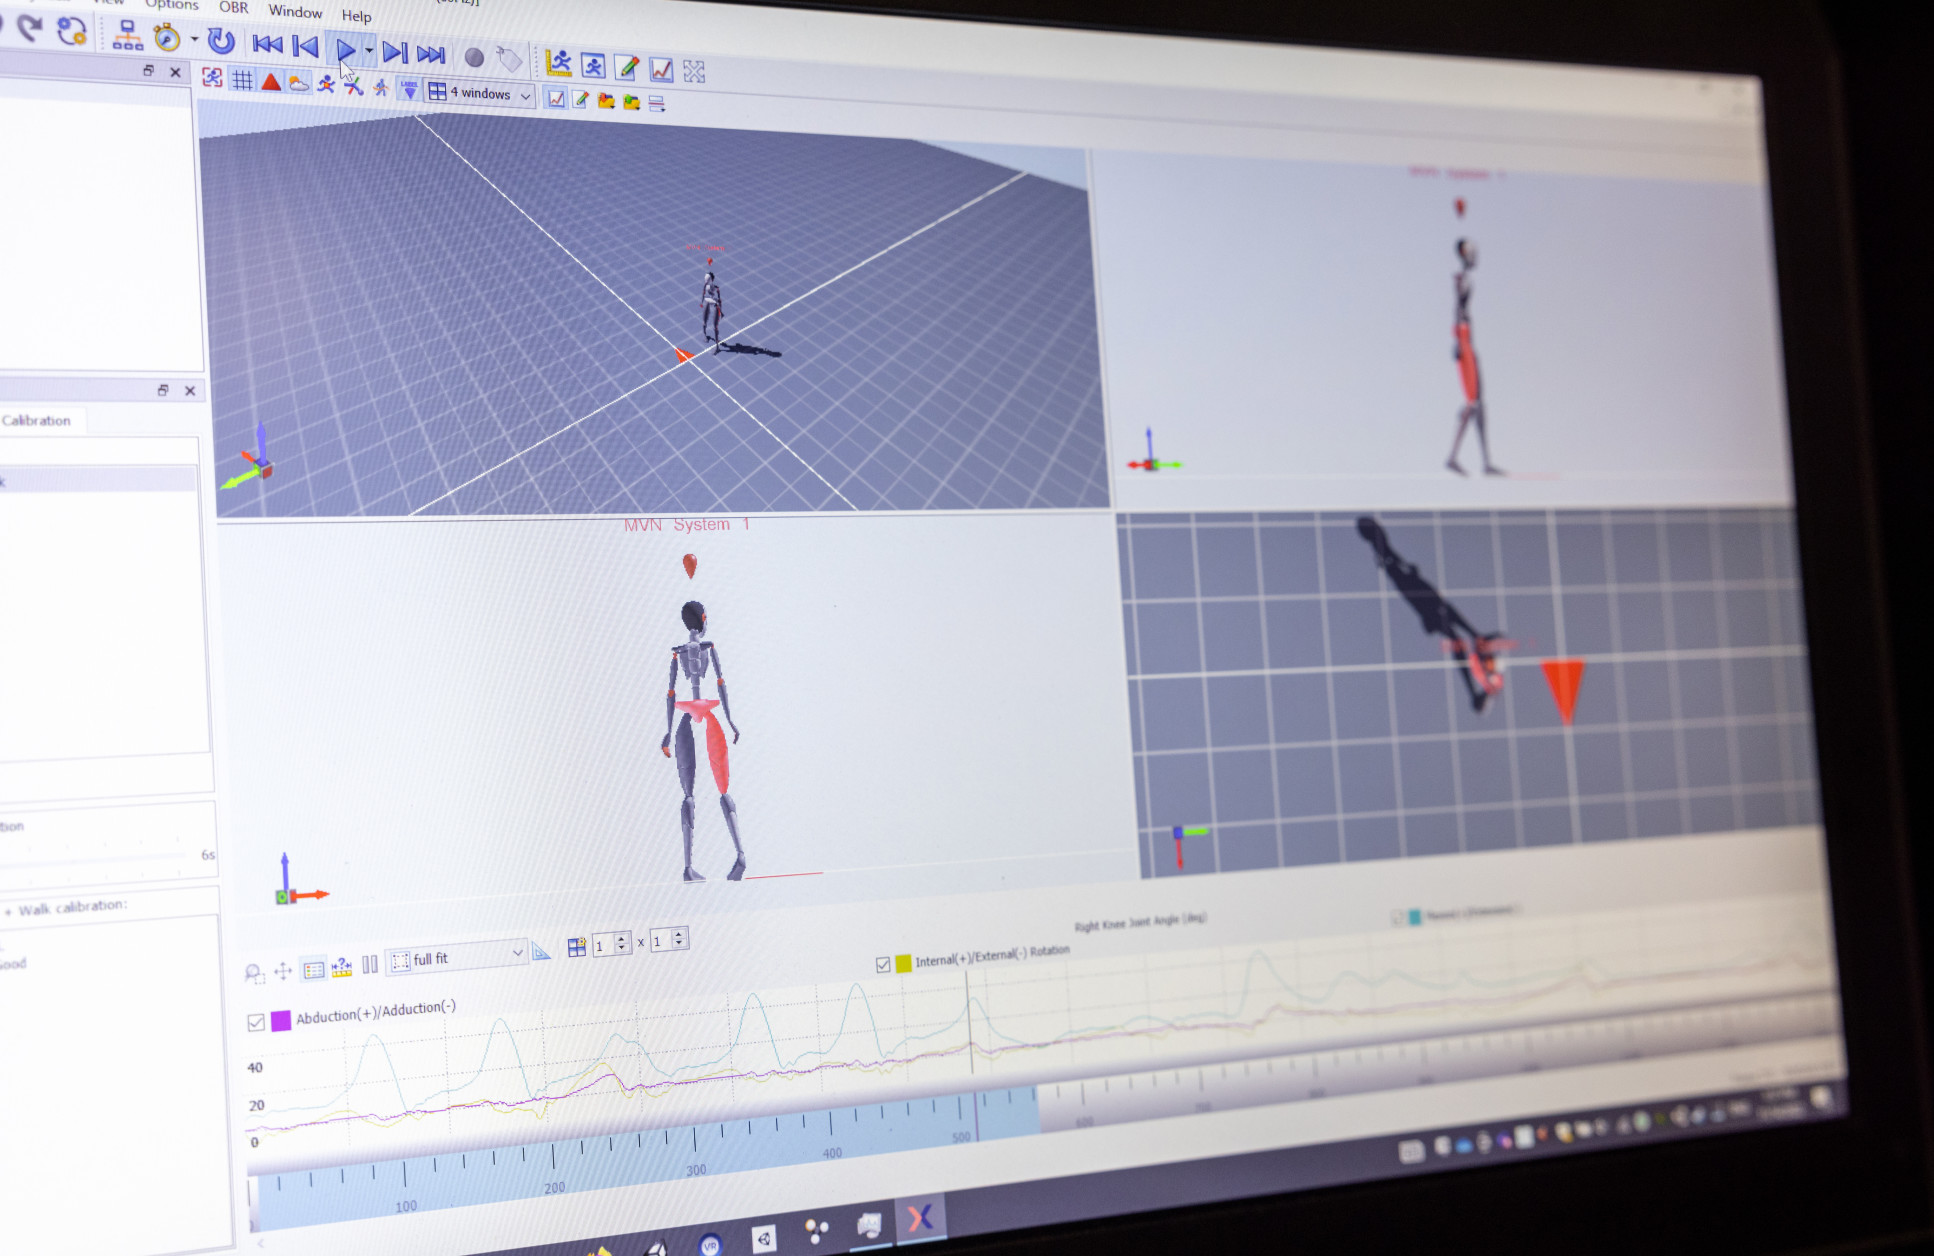 Computer screen showing motion capture stick figures fed into by the patient